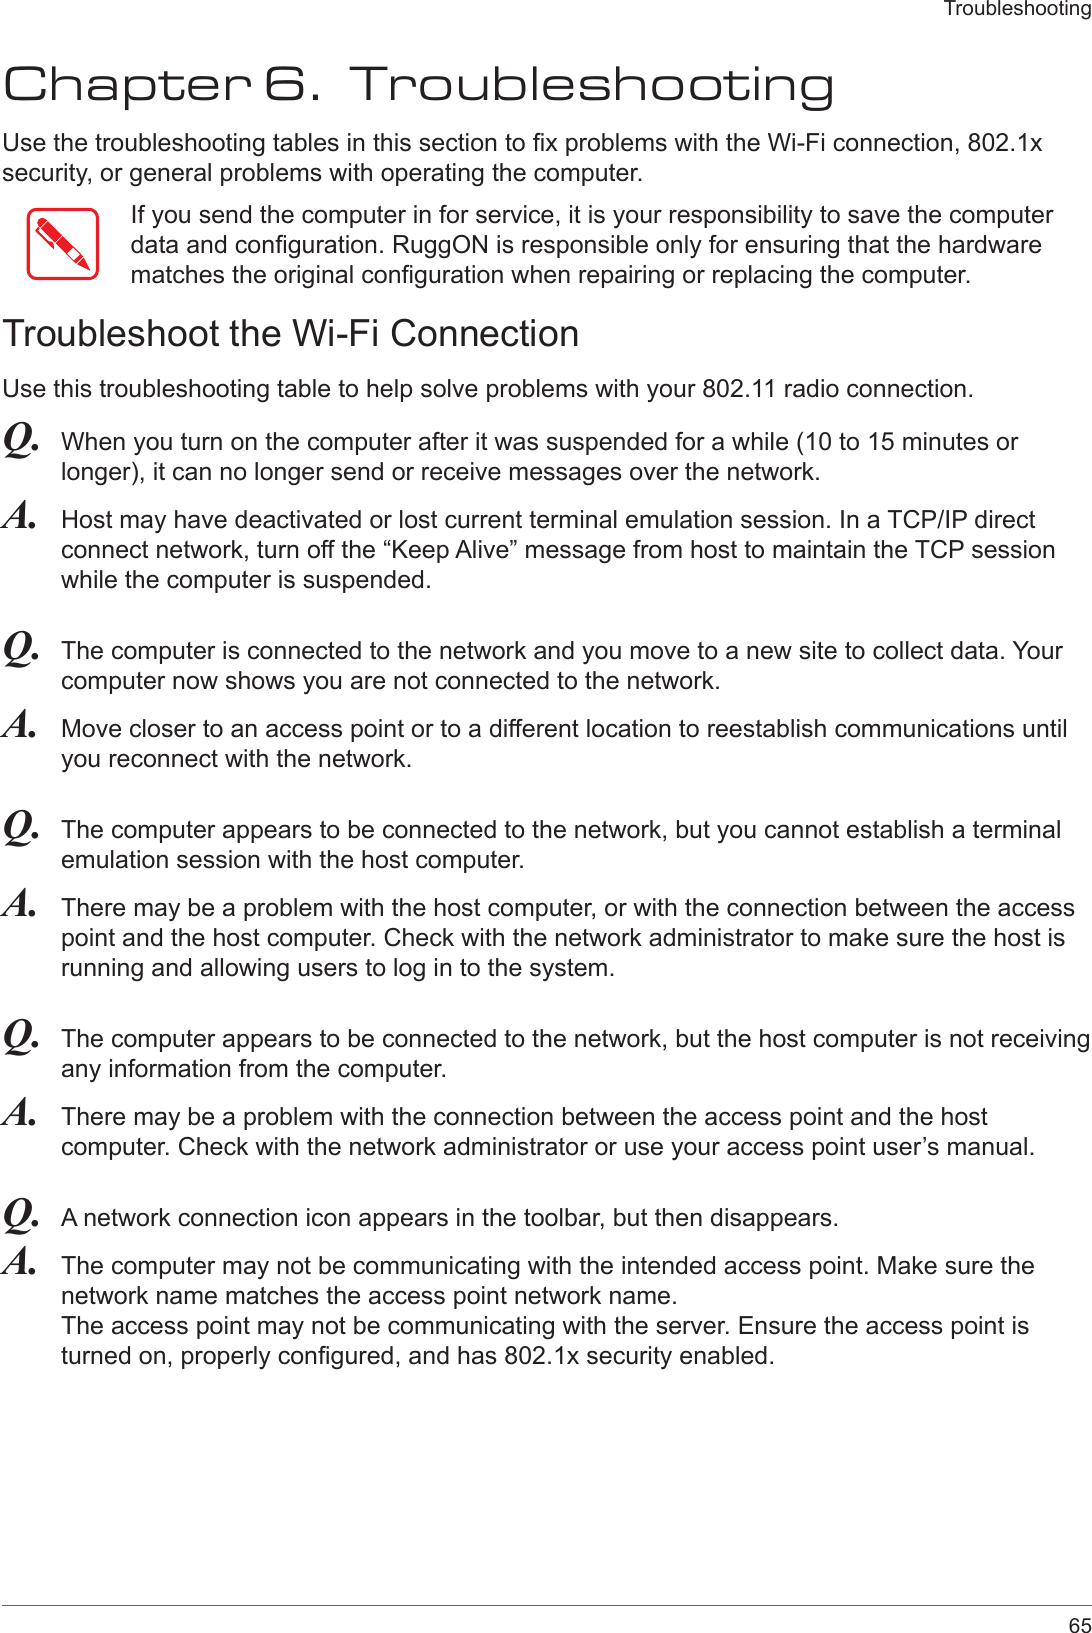 65TroubleshootingChapter 6.  TroubleshootingUse the troubleshooting tables in this section to x problems with the Wi-Fi connection, 802.1x security, or general problems with operating the computer.If you send the computer in for service, it is your responsibility to save the computer data and conguration. RuggON is responsible only for ensuring that the hardware matches the original conguration when repairing or replacing the computer.Troubleshoot the Wi-Fi ConnectionUse this troubleshooting table to help solve problems with your 802.11 radio connection.Q.  When you turn on the computer after it was suspended for a while (10 to 15 minutes or longer), it can no longer send or receive messages over the network.A.  Host may have deactivated or lost current terminal emulation session. In a TCP/IP direct connect network, turn off the “Keep Alive” message from host to maintain the TCP session while the computer is suspended.Q.  The computer is connected to the network and you move to a new site to collect data. Your computer now shows you are not connected to the network.A.  Move closer to an access point or to a different location to reestablish communications until you reconnect with the network.Q.  The computer appears to be connected to the network, but you cannot establish a terminal emulation session with the host computer.A.  There may be a problem with the host computer, or with the connection between the access point and the host computer. Check with the network administrator to make sure the host is running and allowing users to log in to the system.Q.  The computer appears to be connected to the network, but the host computer is not receiving any information from the computer.A.  There may be a problem with the connection between the access point and the host computer. Check with the network administrator or use your access point user’s manual.Q.  A network connection icon appears in the toolbar, but then disappears.A.  The computer may not be communicating with the intended access point. Make sure the network name matches the access point network name. The access point may not be communicating with the server. Ensure the access point is turned on, properly congured, and has 802.1x security enabled.